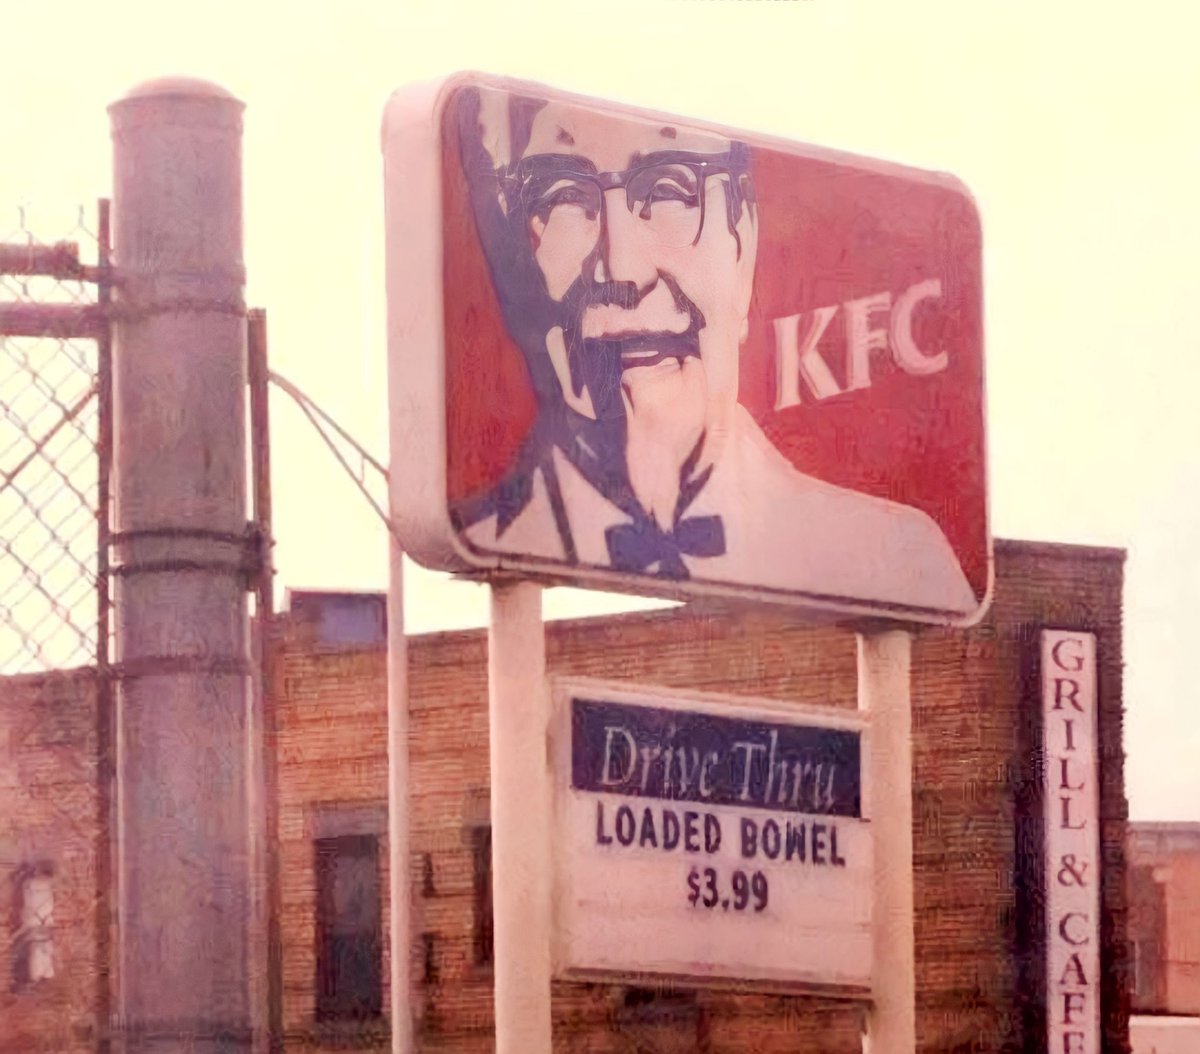 KFC really is really scraping bottom with this one. #KFC #signs